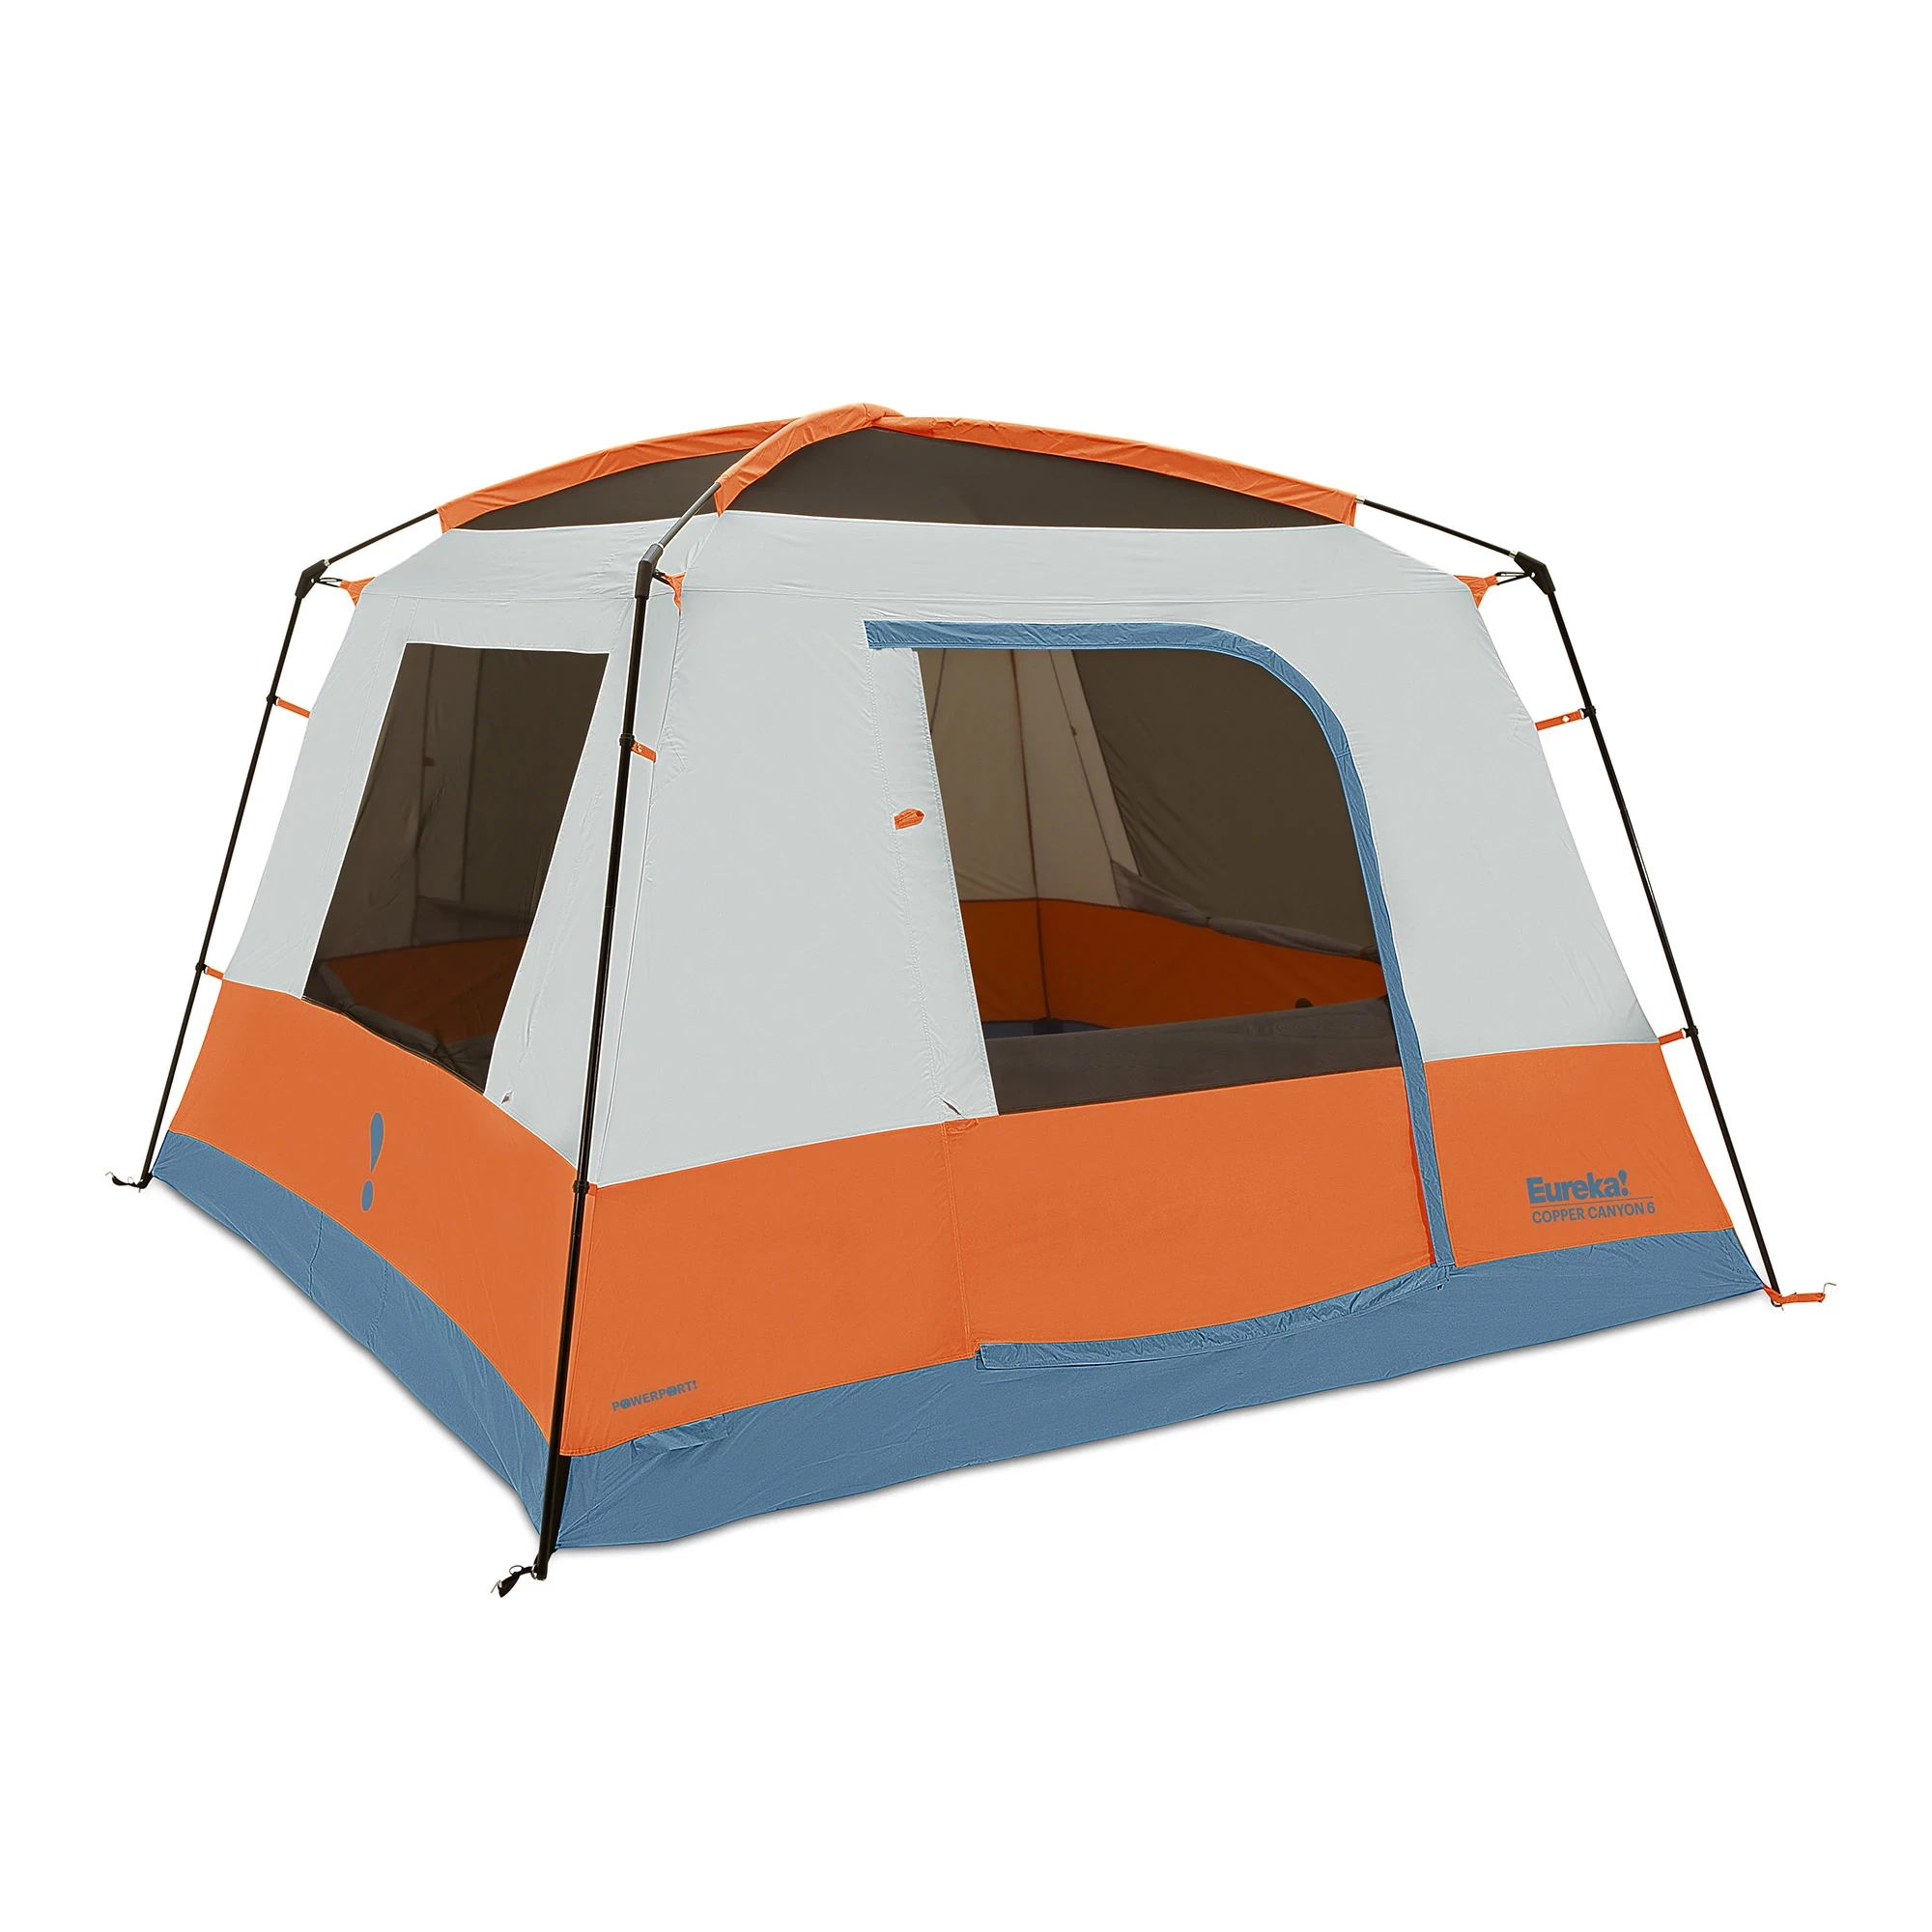 Copper Canyon LX 6 tent without rainfly windows open